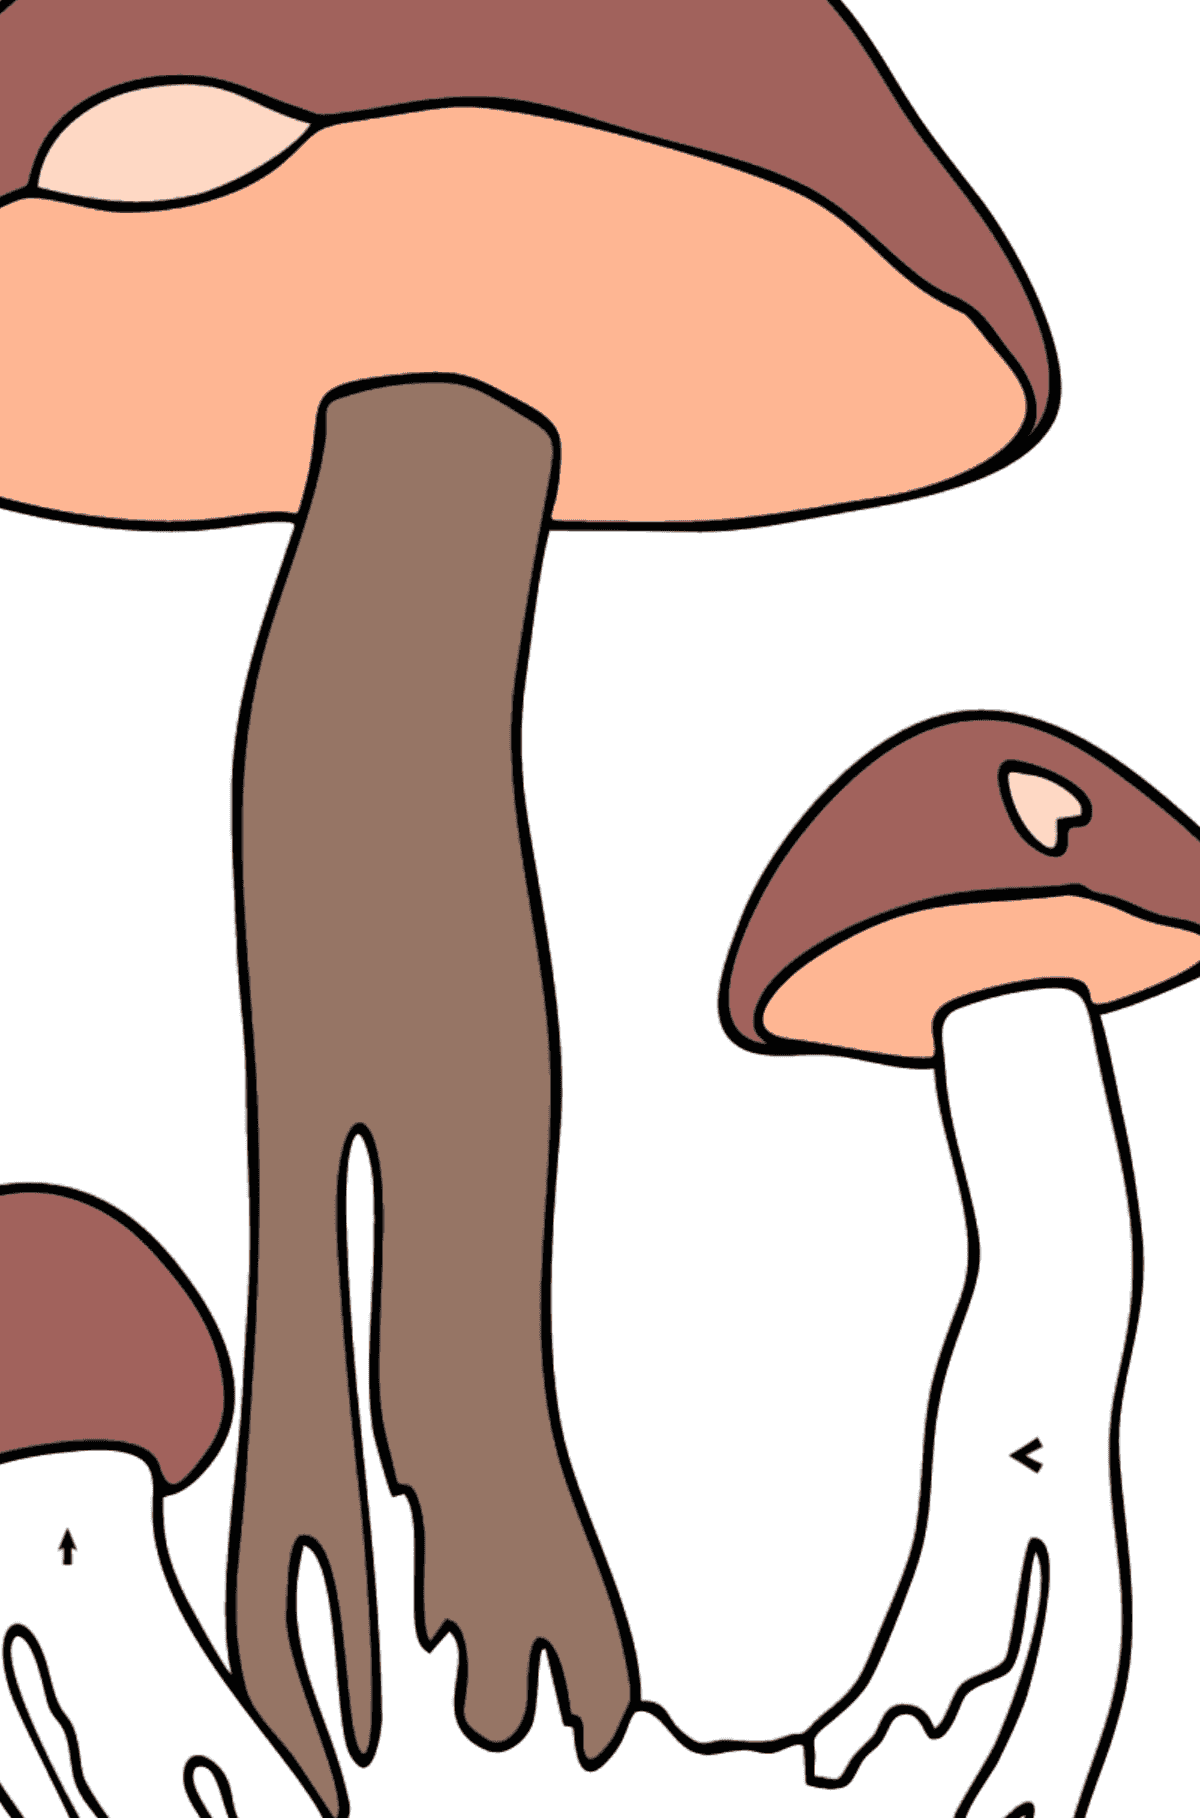 Rough boletus coloring page - Coloring by Symbols for Kids